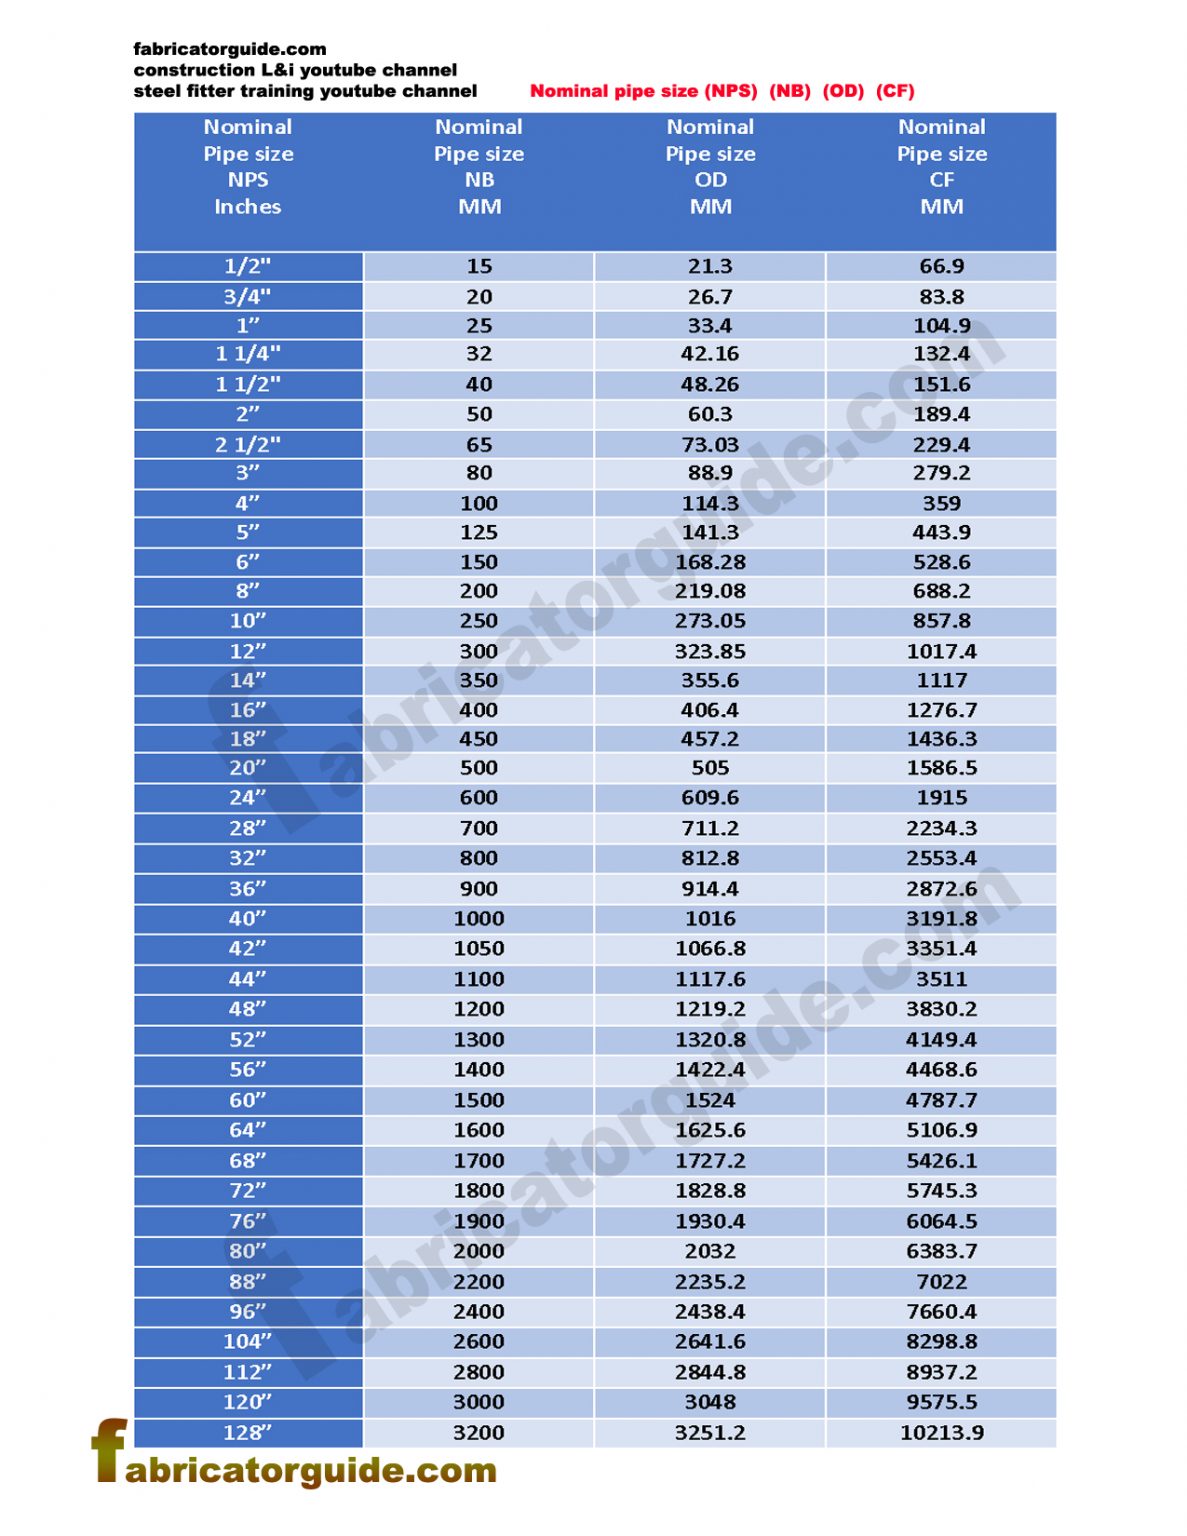 Nominal Pipe size NPS, NB, OD, CF, pipe dimensions chart NPS, NB,